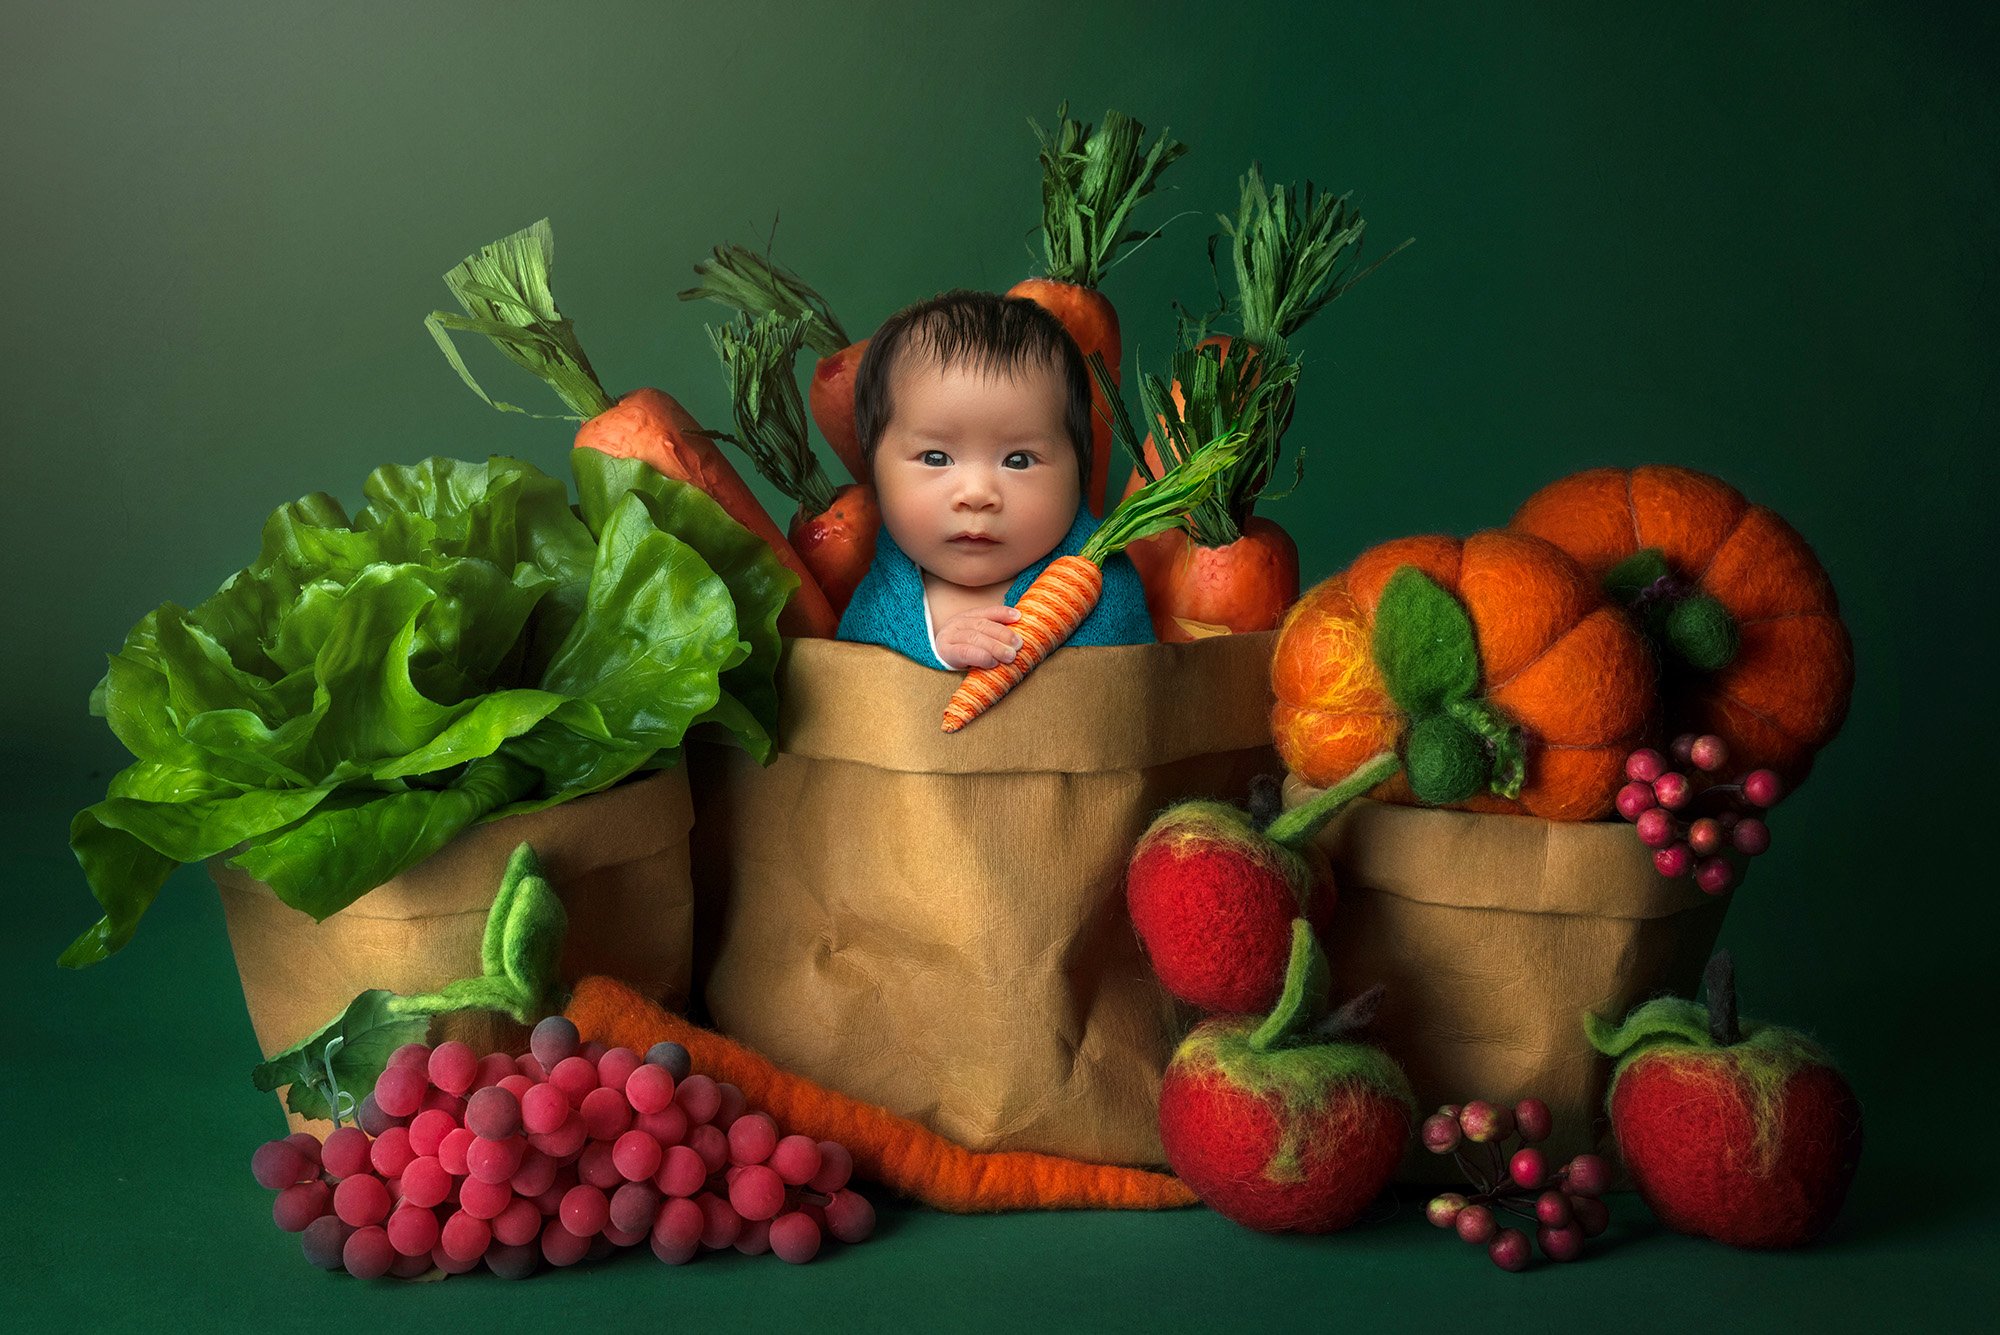 vibrant newborn photo newborn baby girl sitting in brown paper bag holding carrot surrounded by felt vegetables and fruit on a green background